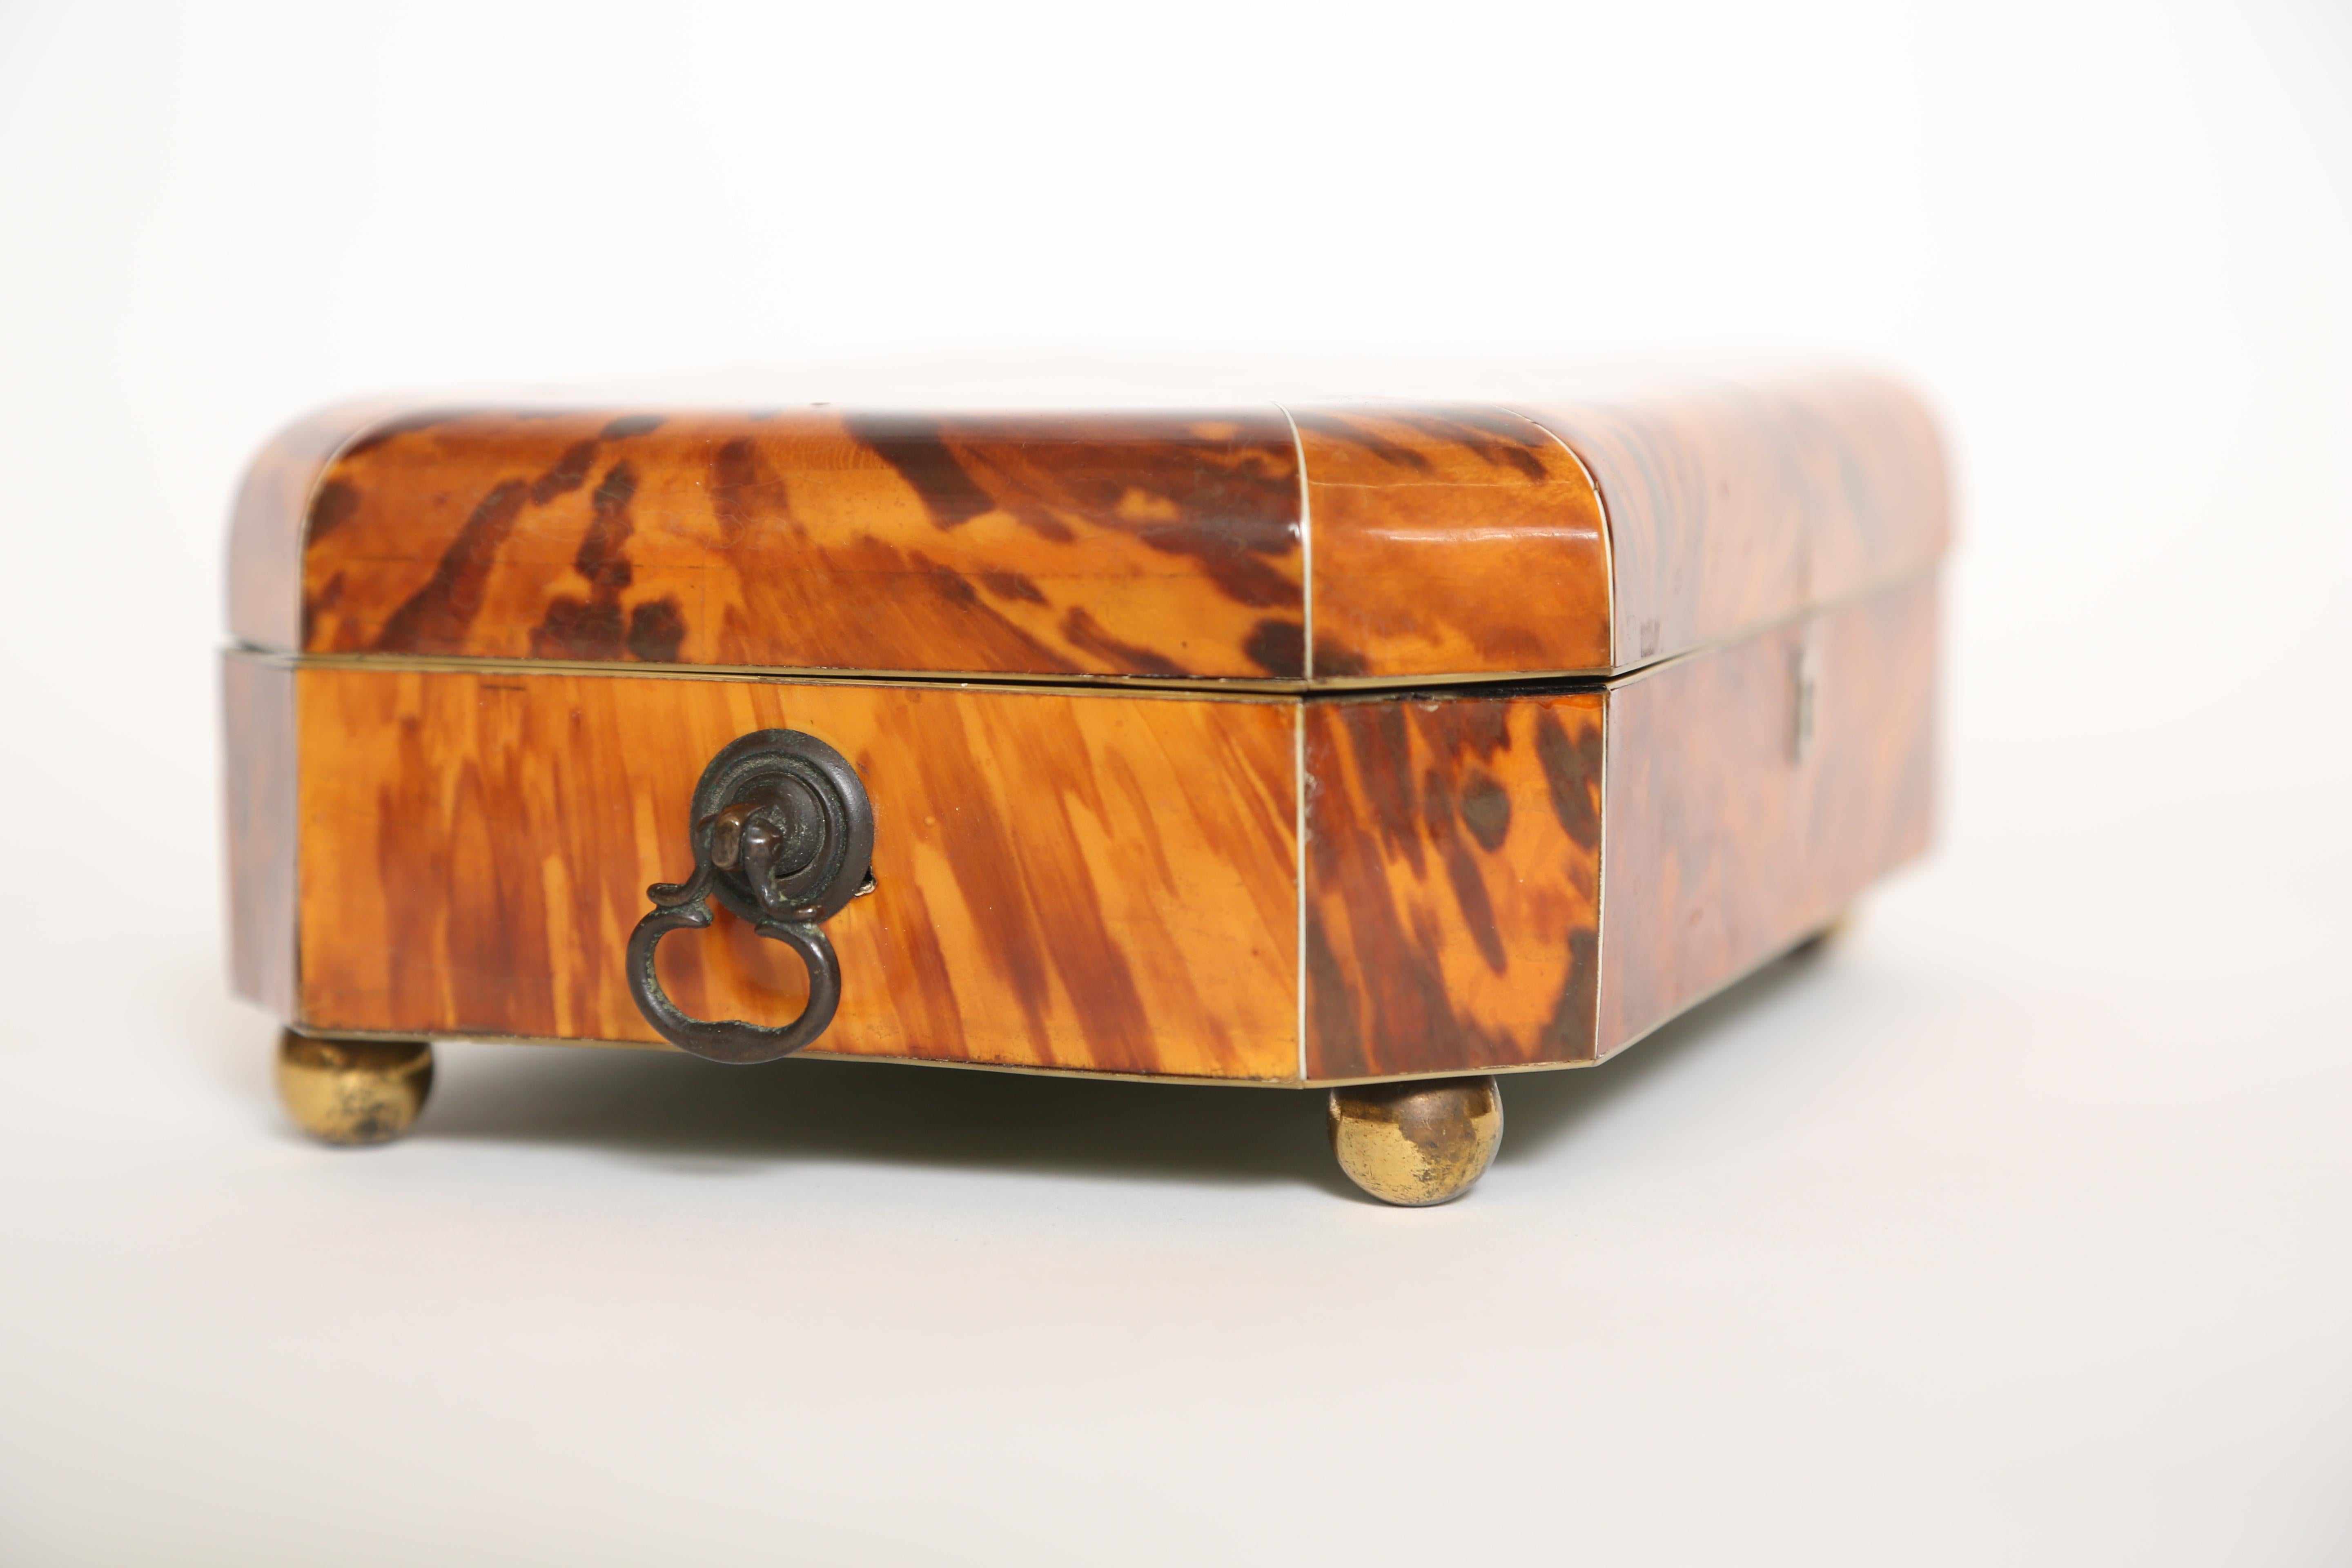 Antique Georgian tortoiseshell jewelry box with brass handles and ball feet. The outer surface is covered with bookmatched panels. The interior was newly relined.

(This item is eligible for a gift box)